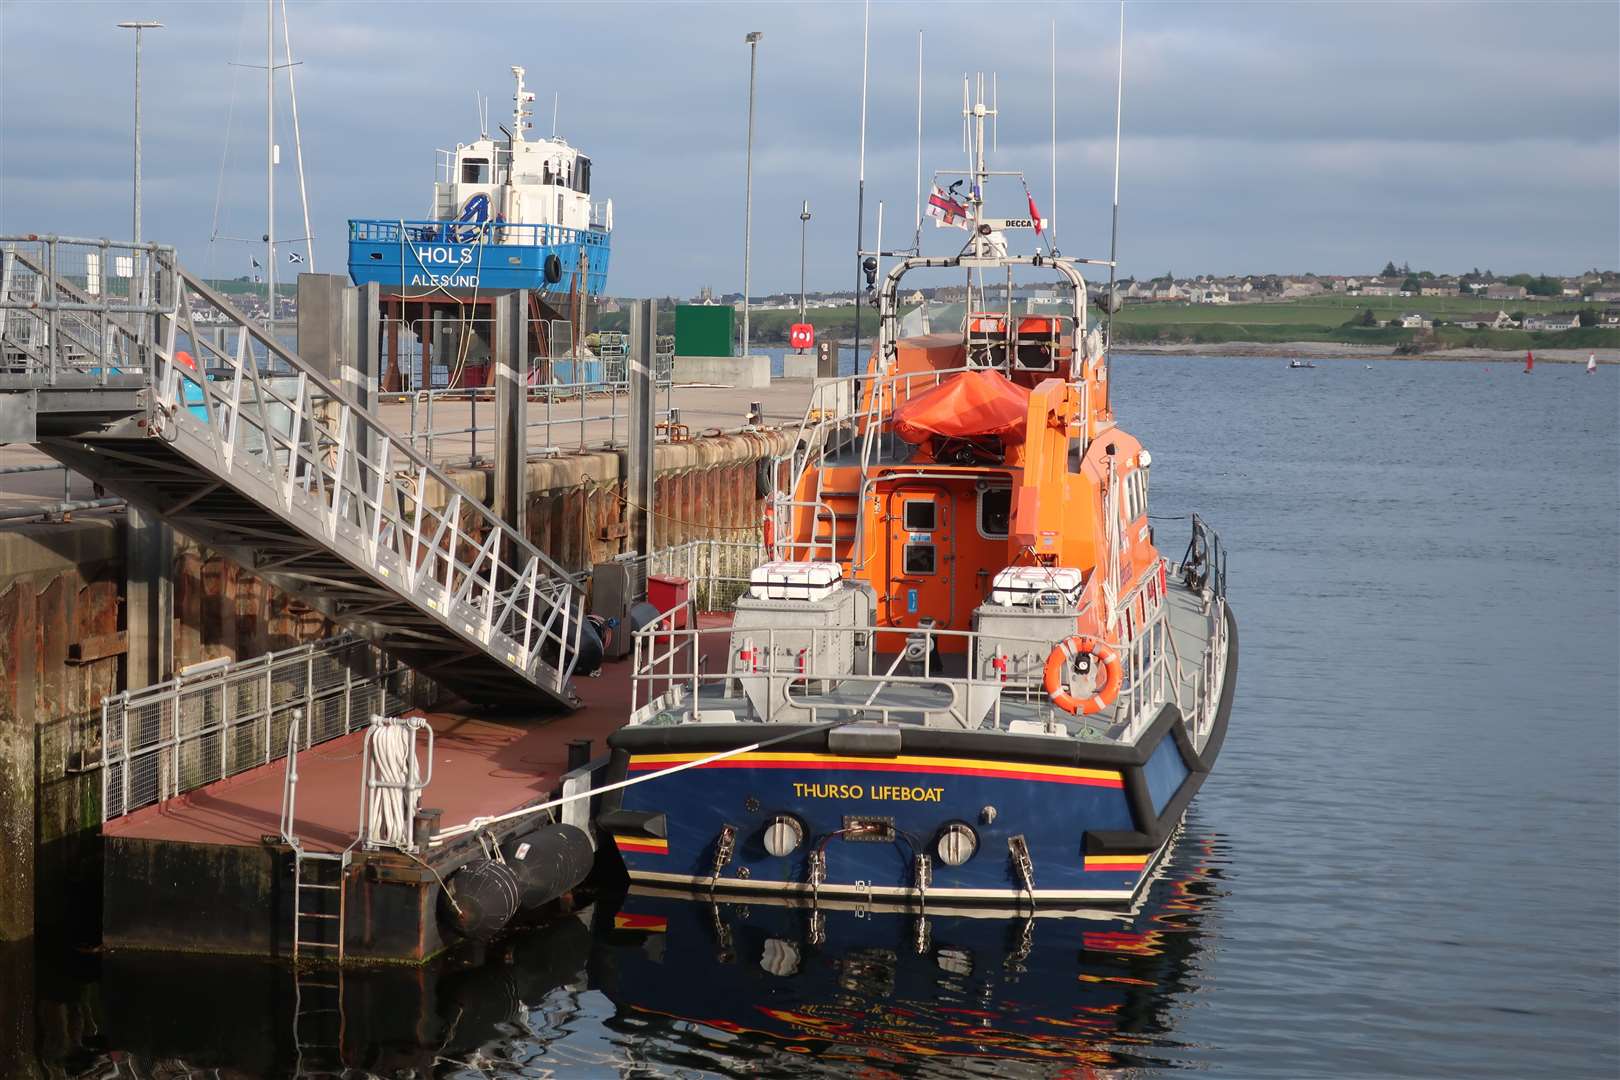 The Thurso lifeboat was involved in the rescue. Picture: John Davidson